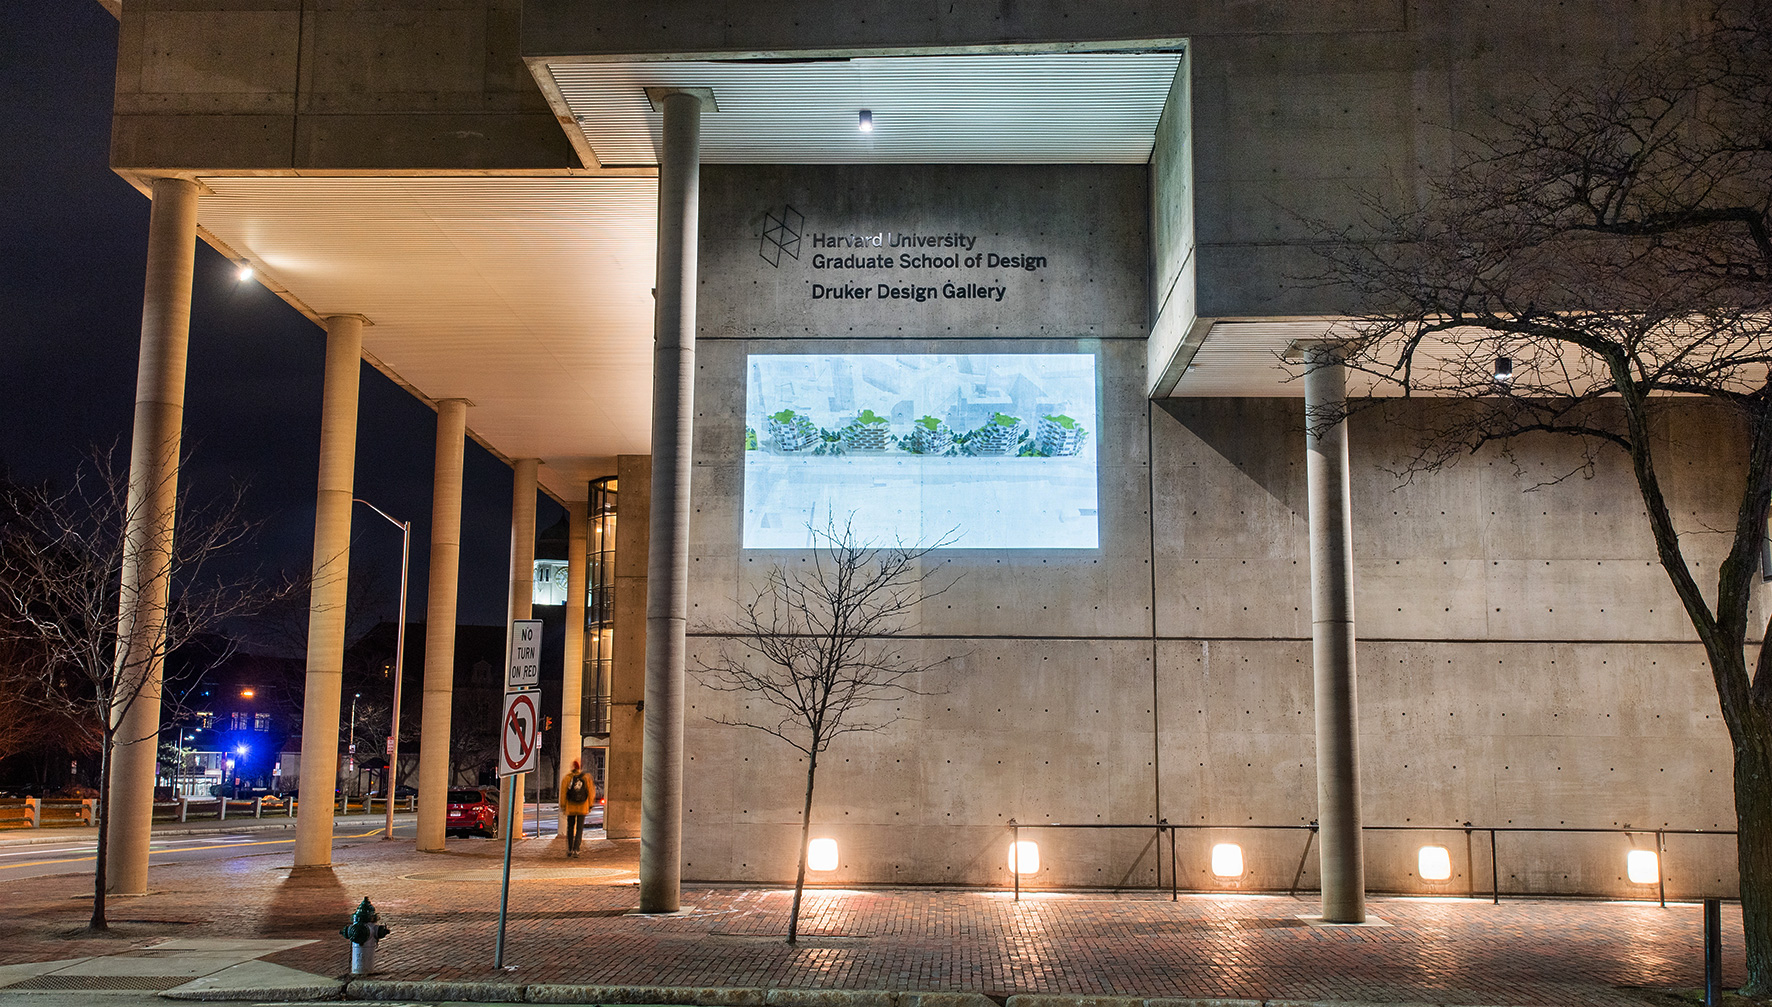 The Cambridge Street facade of Gund hall at night. On the wall is projected an image of a birds-eye rendering of five Dual-Use buildings with balconies and grass-covered roofs.